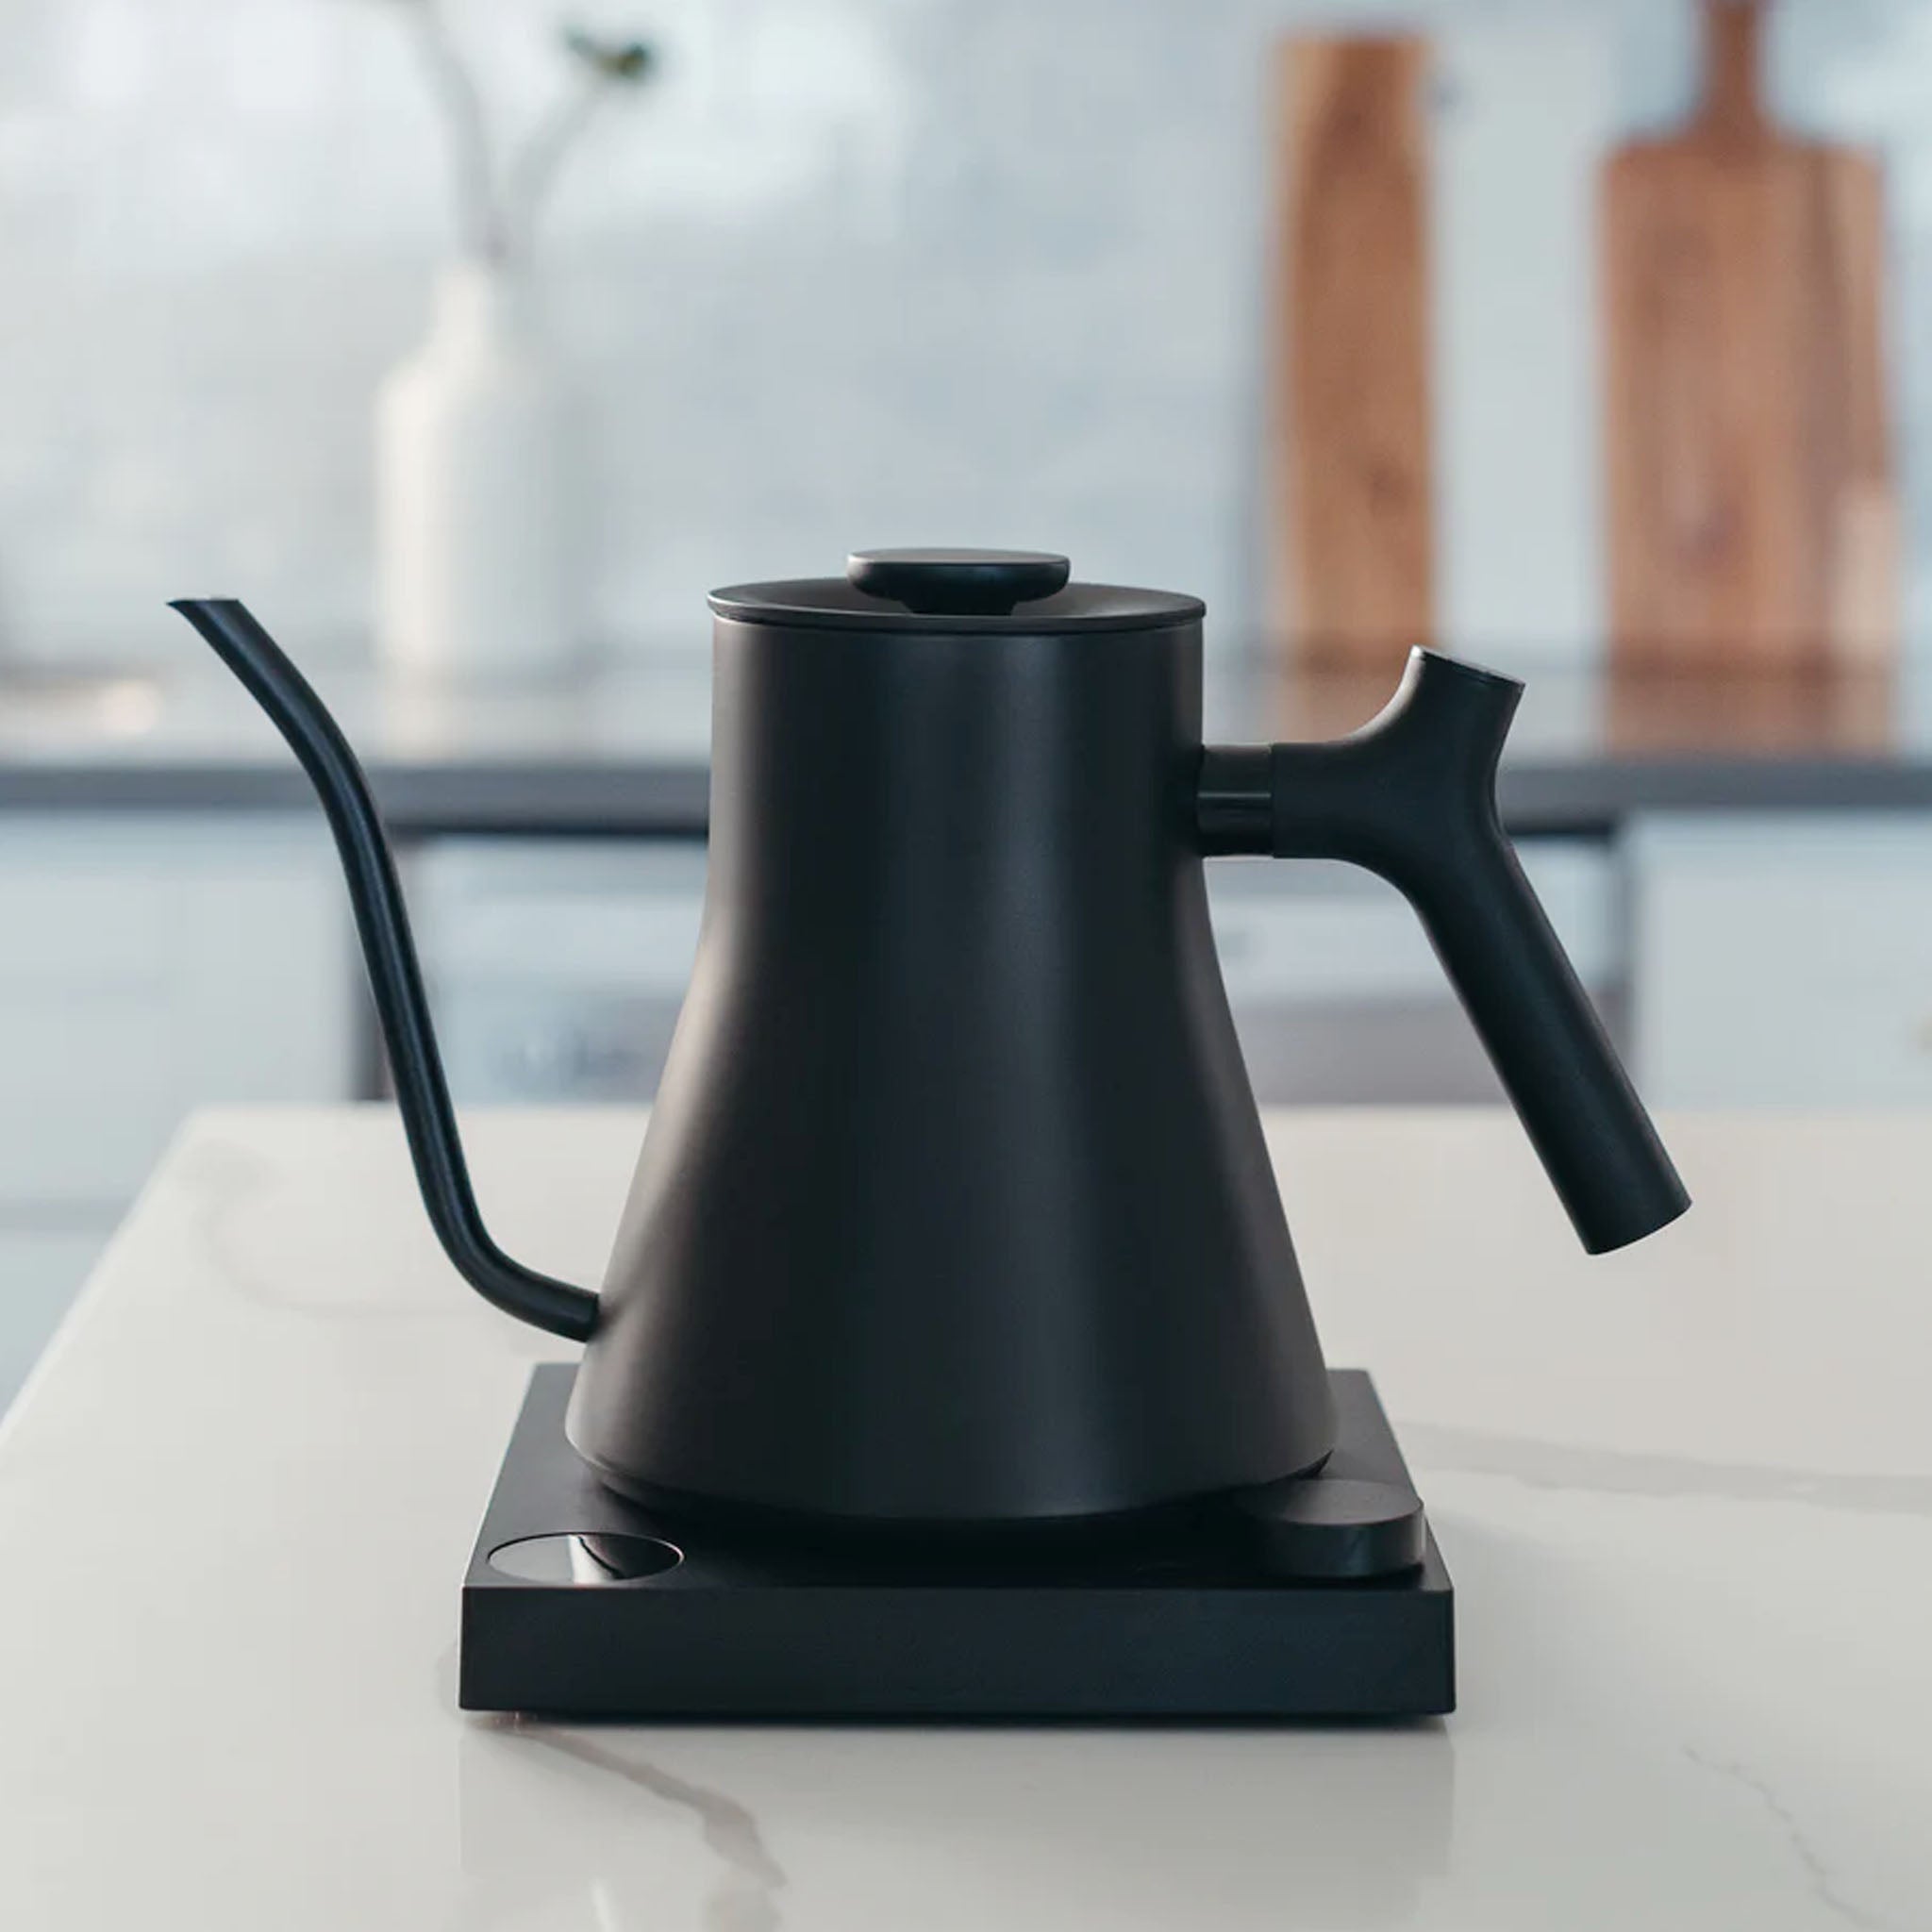 Fellow Stagg EKG Kettles Get An Update With The New Pro Series